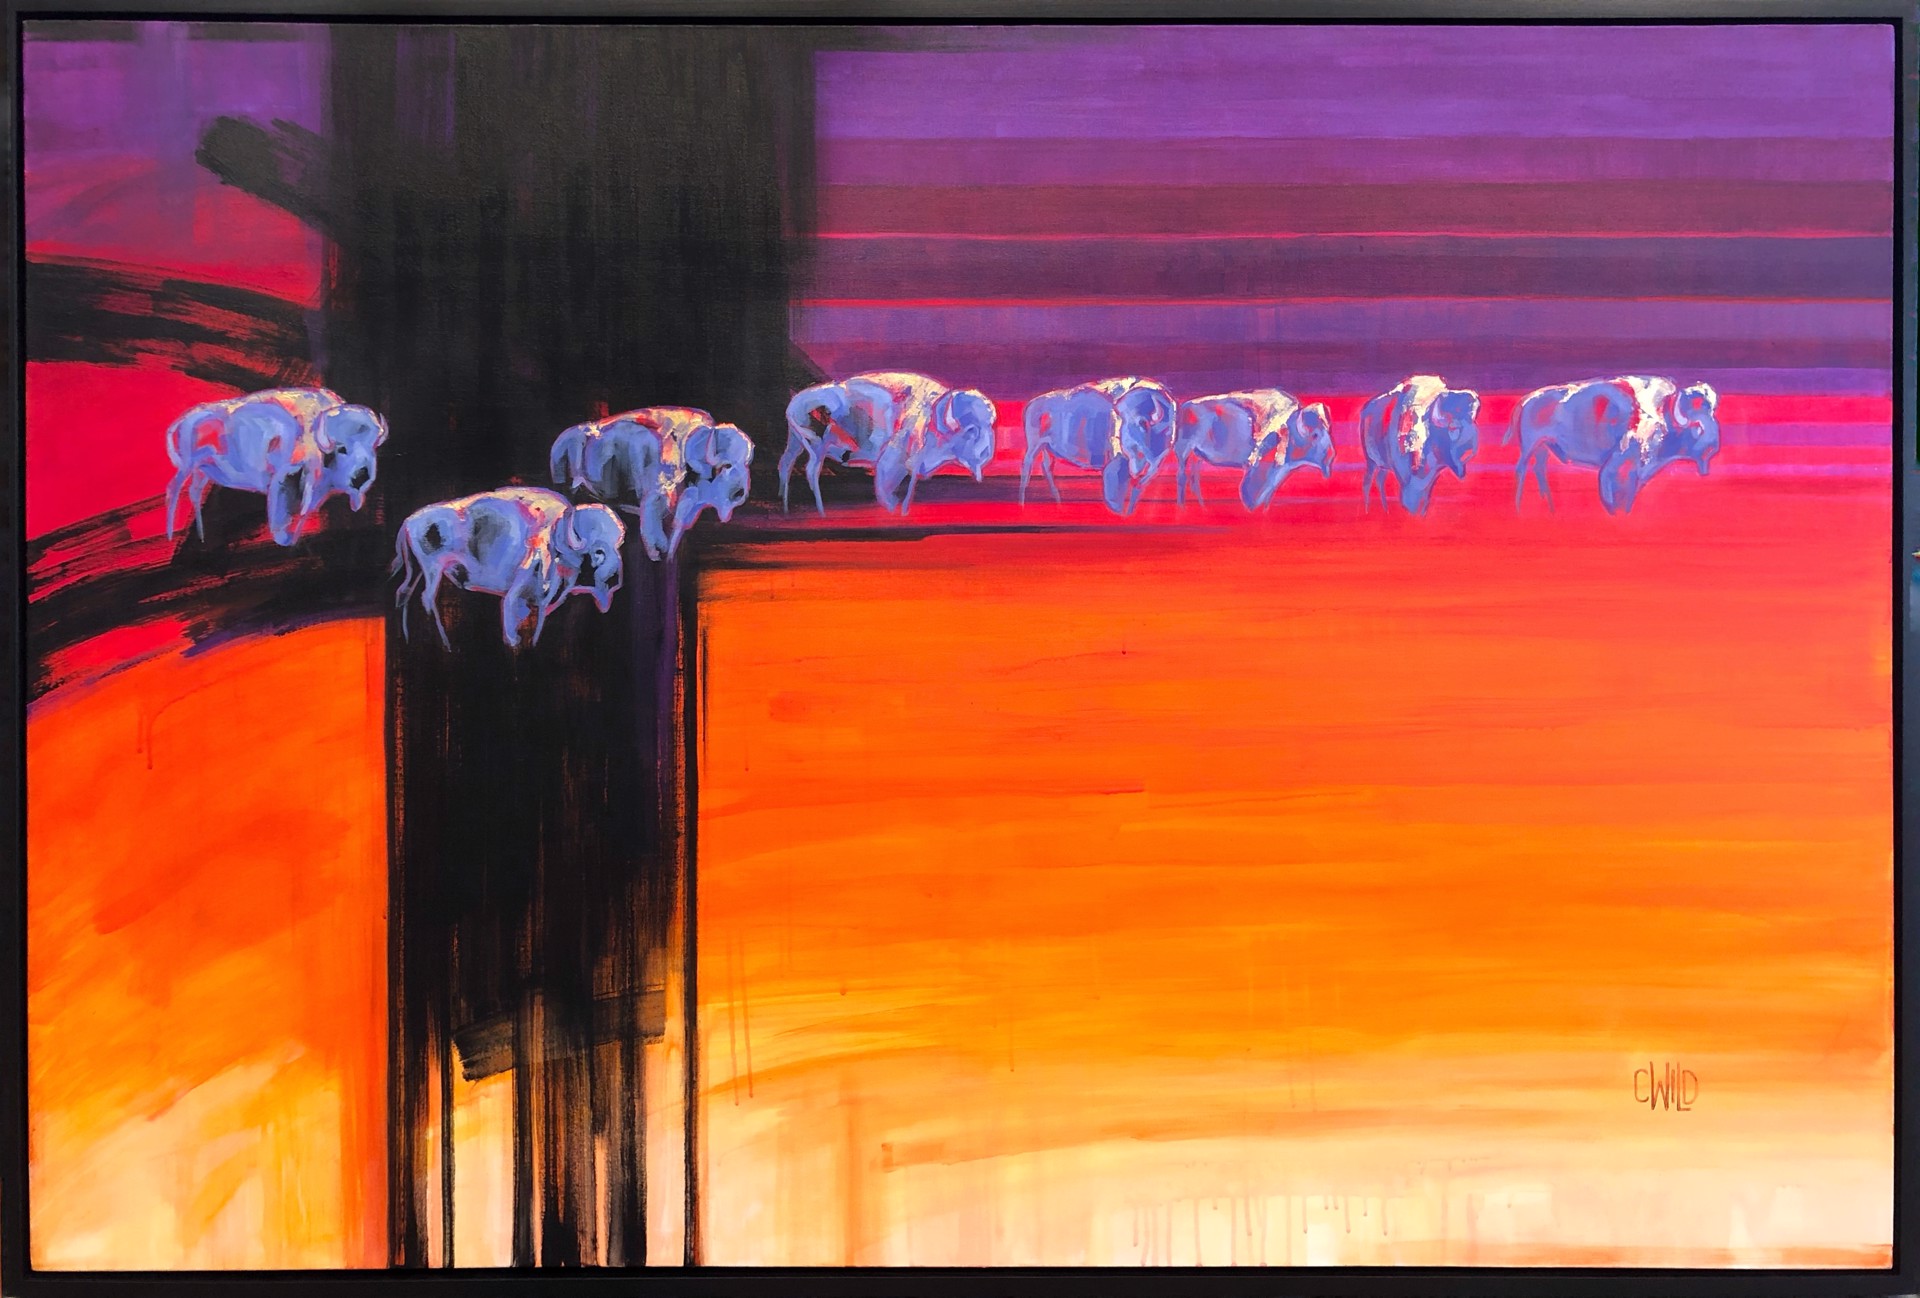 A Contemporary Painting Of Bison With Bright Colors In The Background Available At Gallery Wild